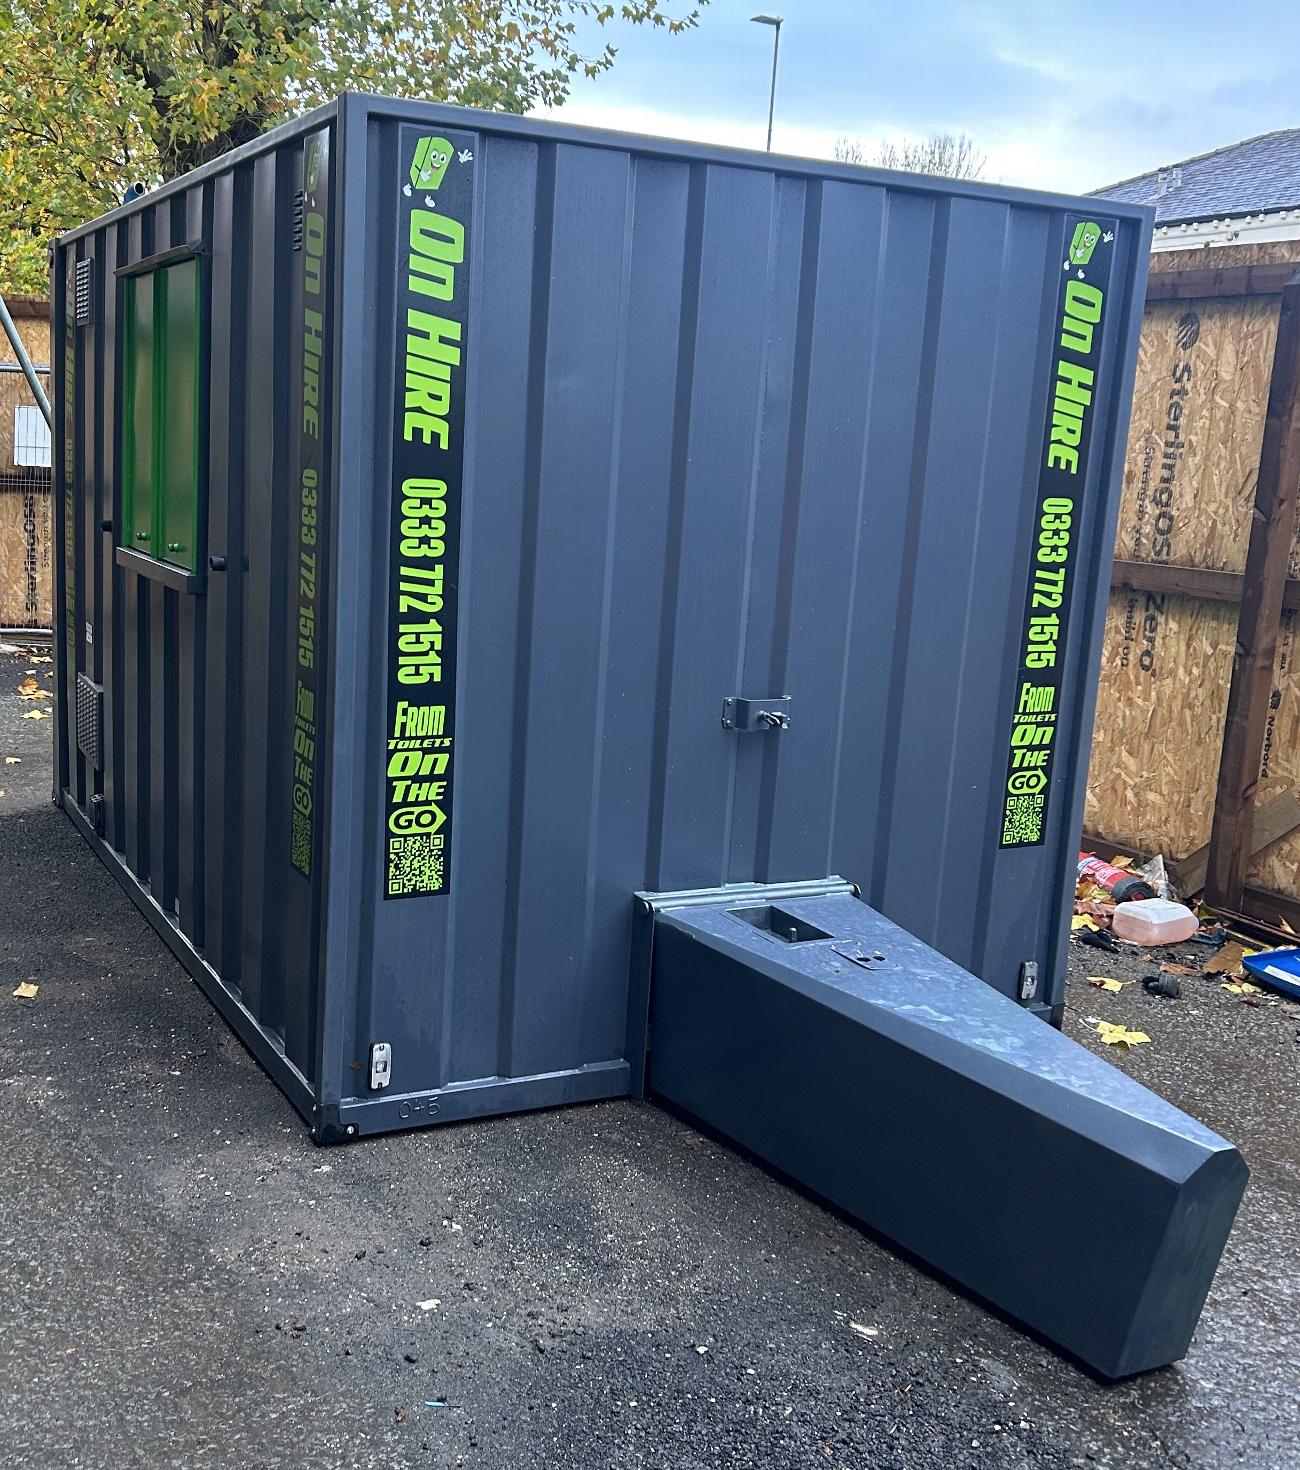 Gallery | Portable Toilet Loo Hire Rental Company in North West uk and Manchester gallery image 5